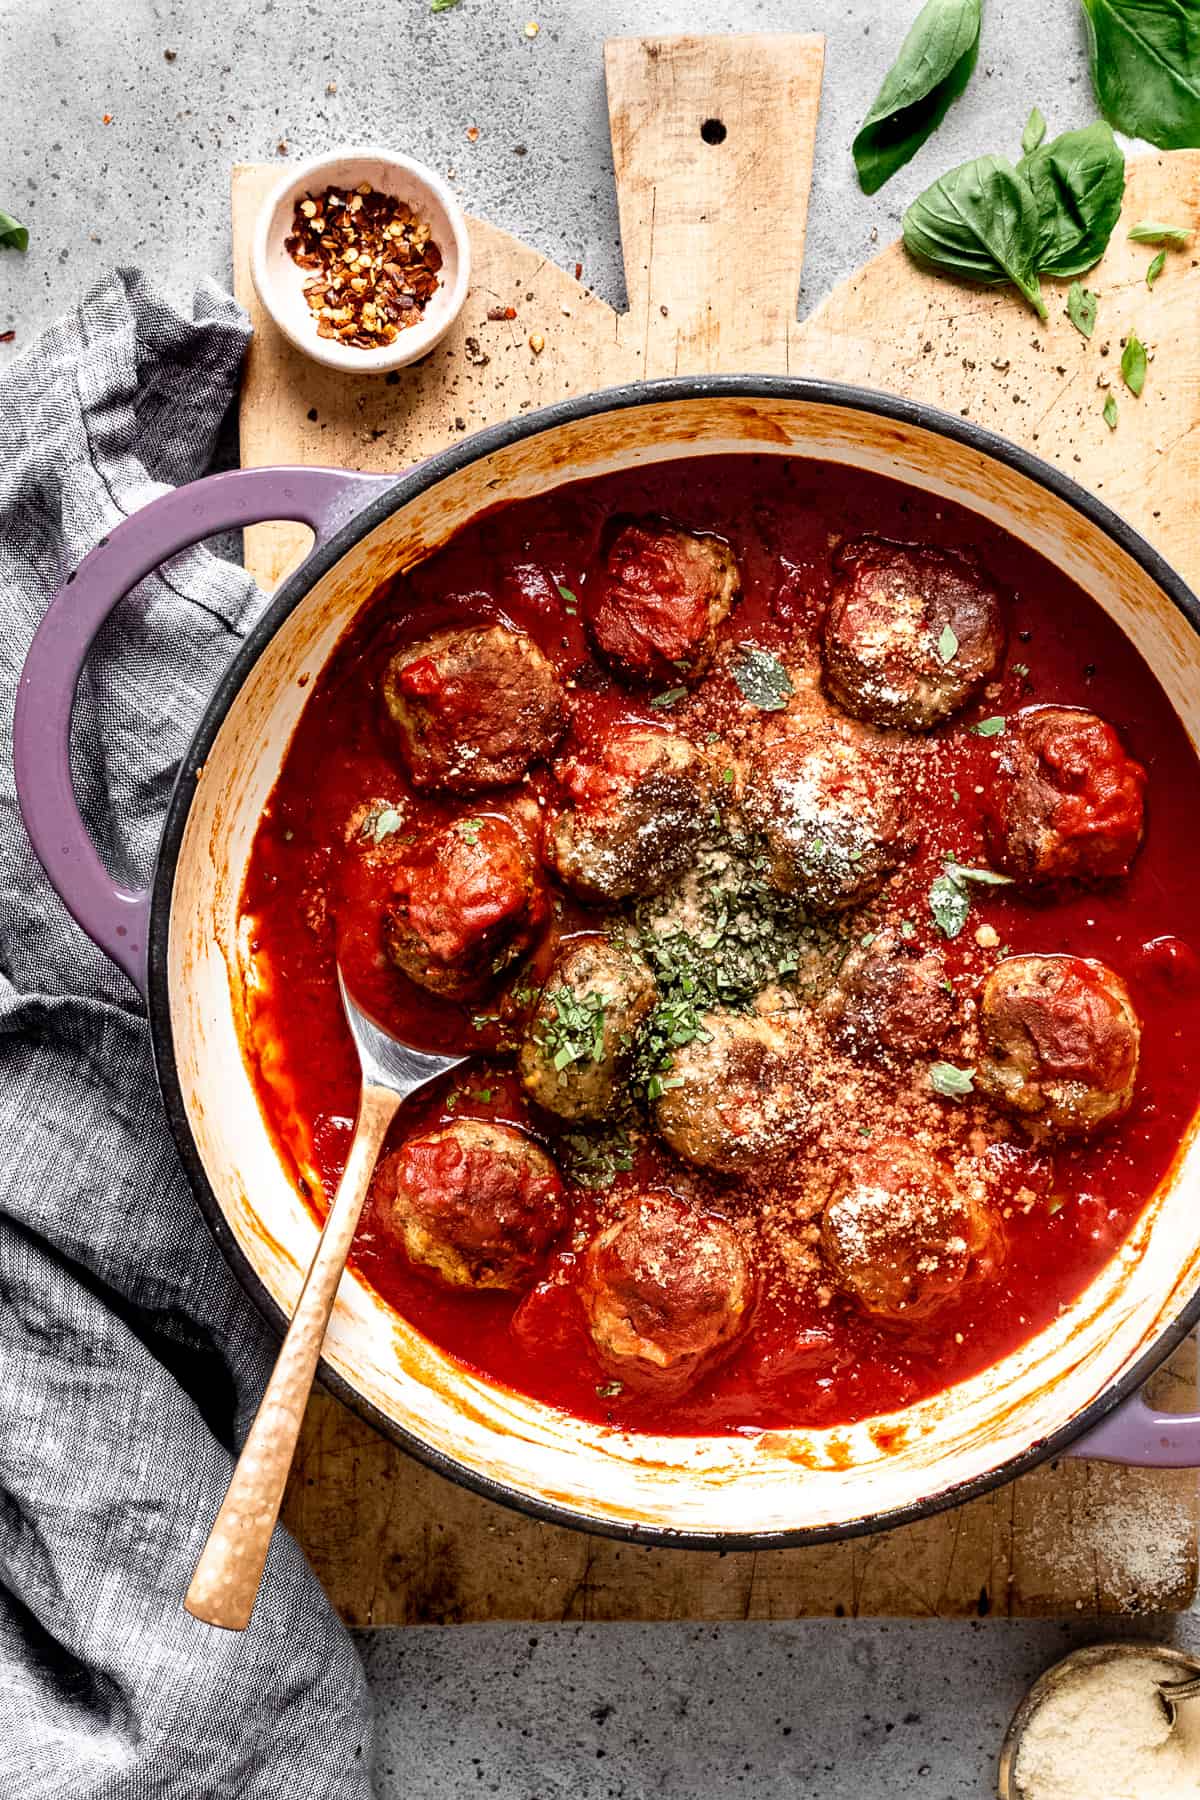 Lamb meatballs in tomato sauce with parmesan.